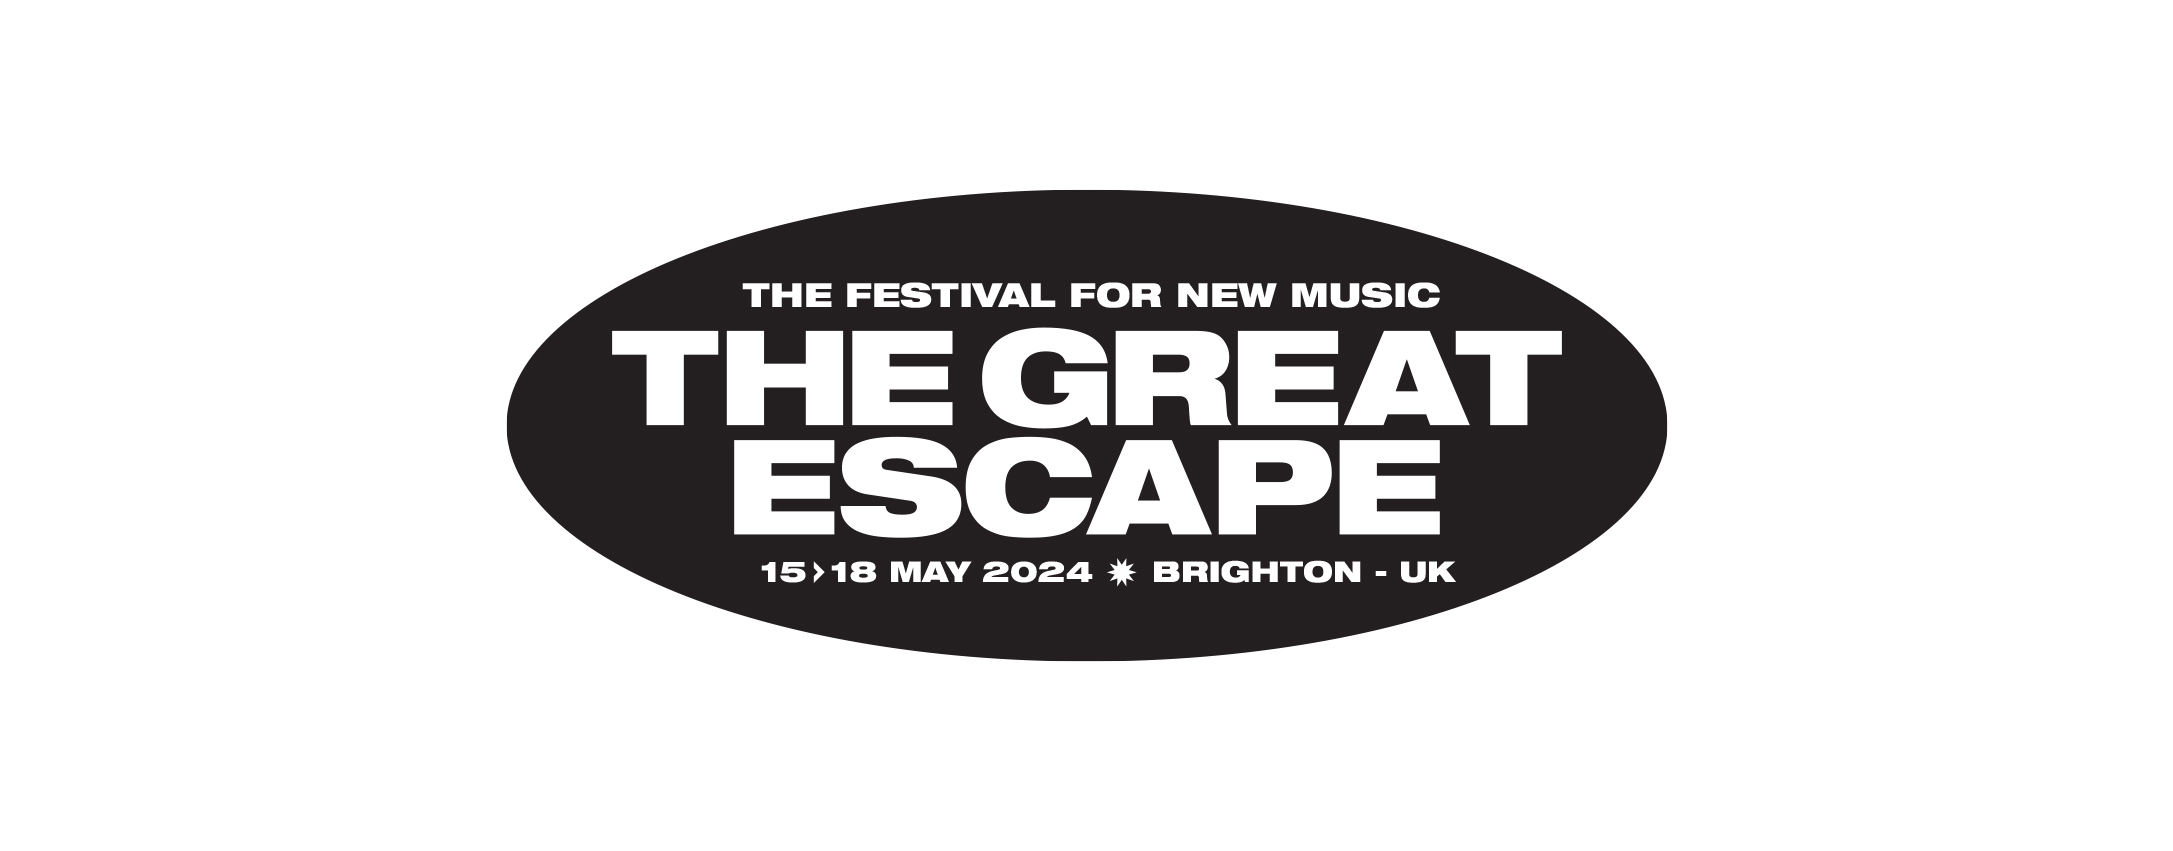 The festival for new music. The Great Escape